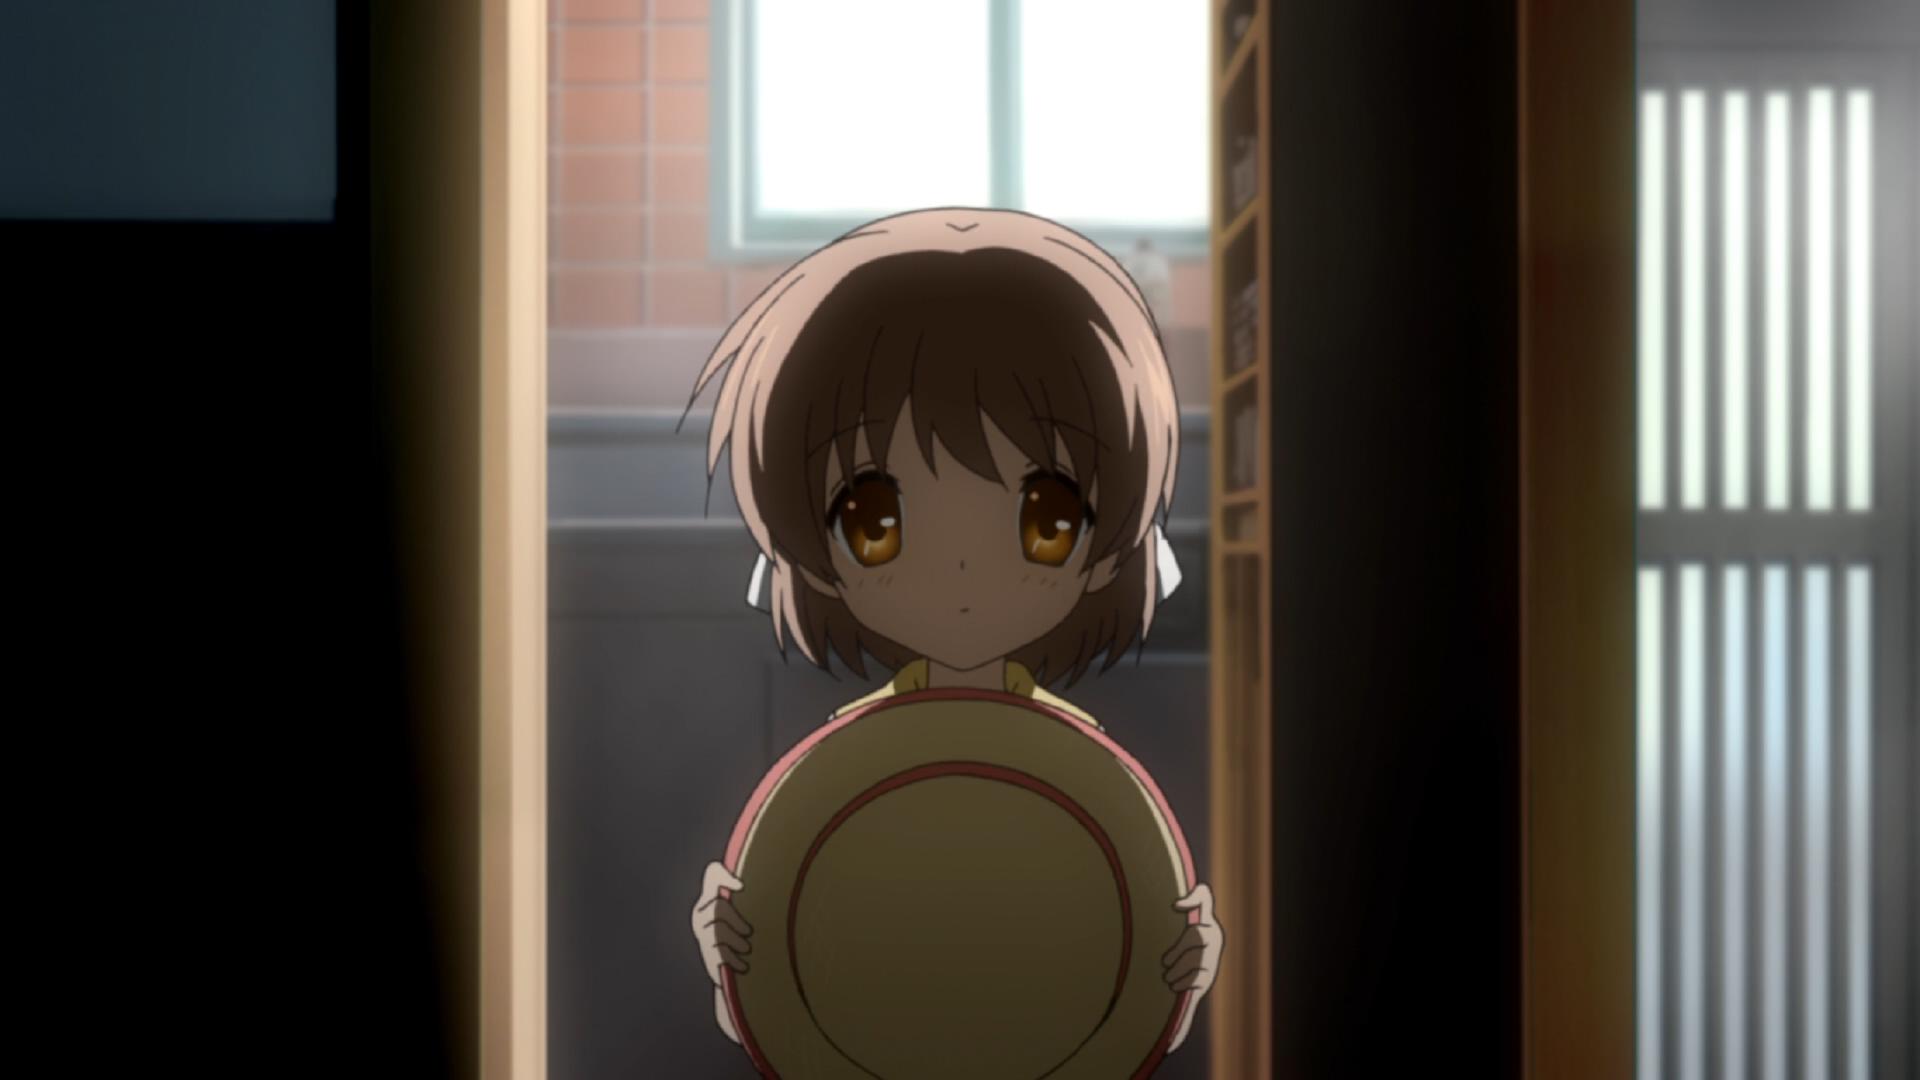 [QTS] CLANNAD ~After Story~ ep 19 (BD H264 1920x1080 24fps FLAC 5.1ch)_201224191533.jpg